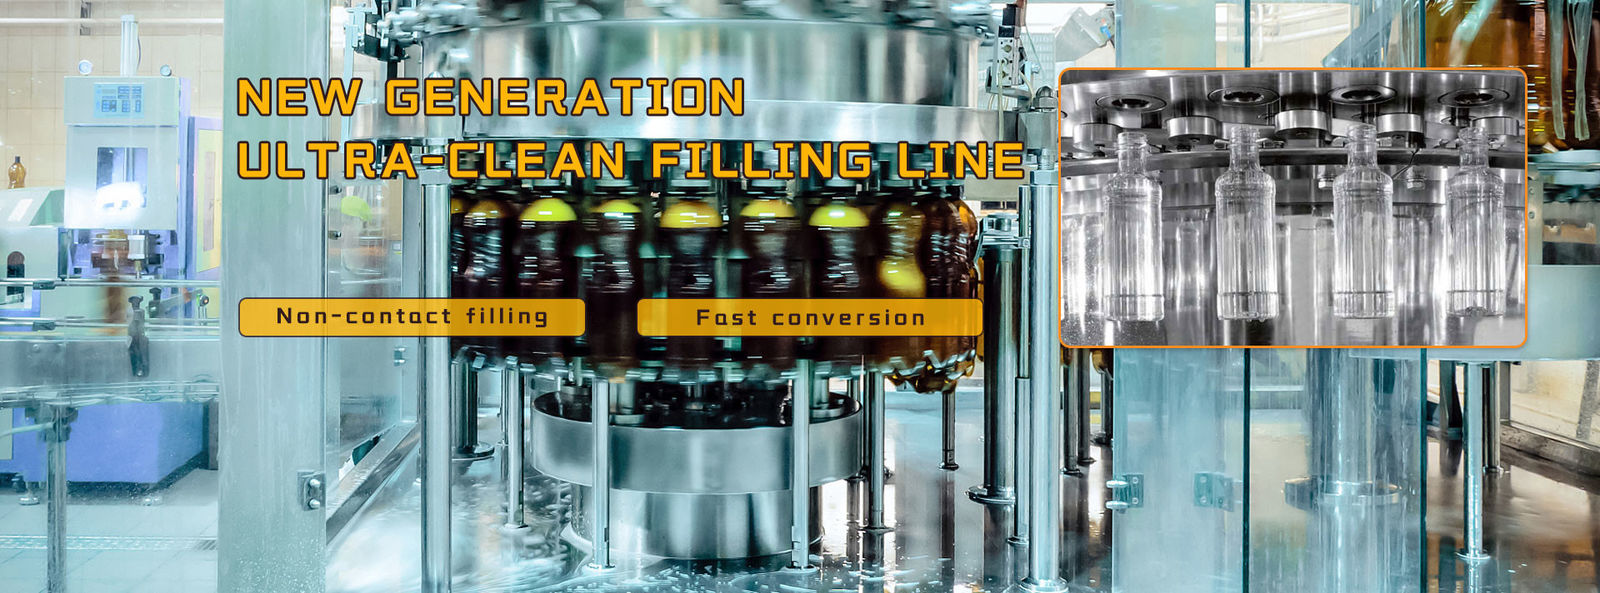 quality Water Filling Machine Service